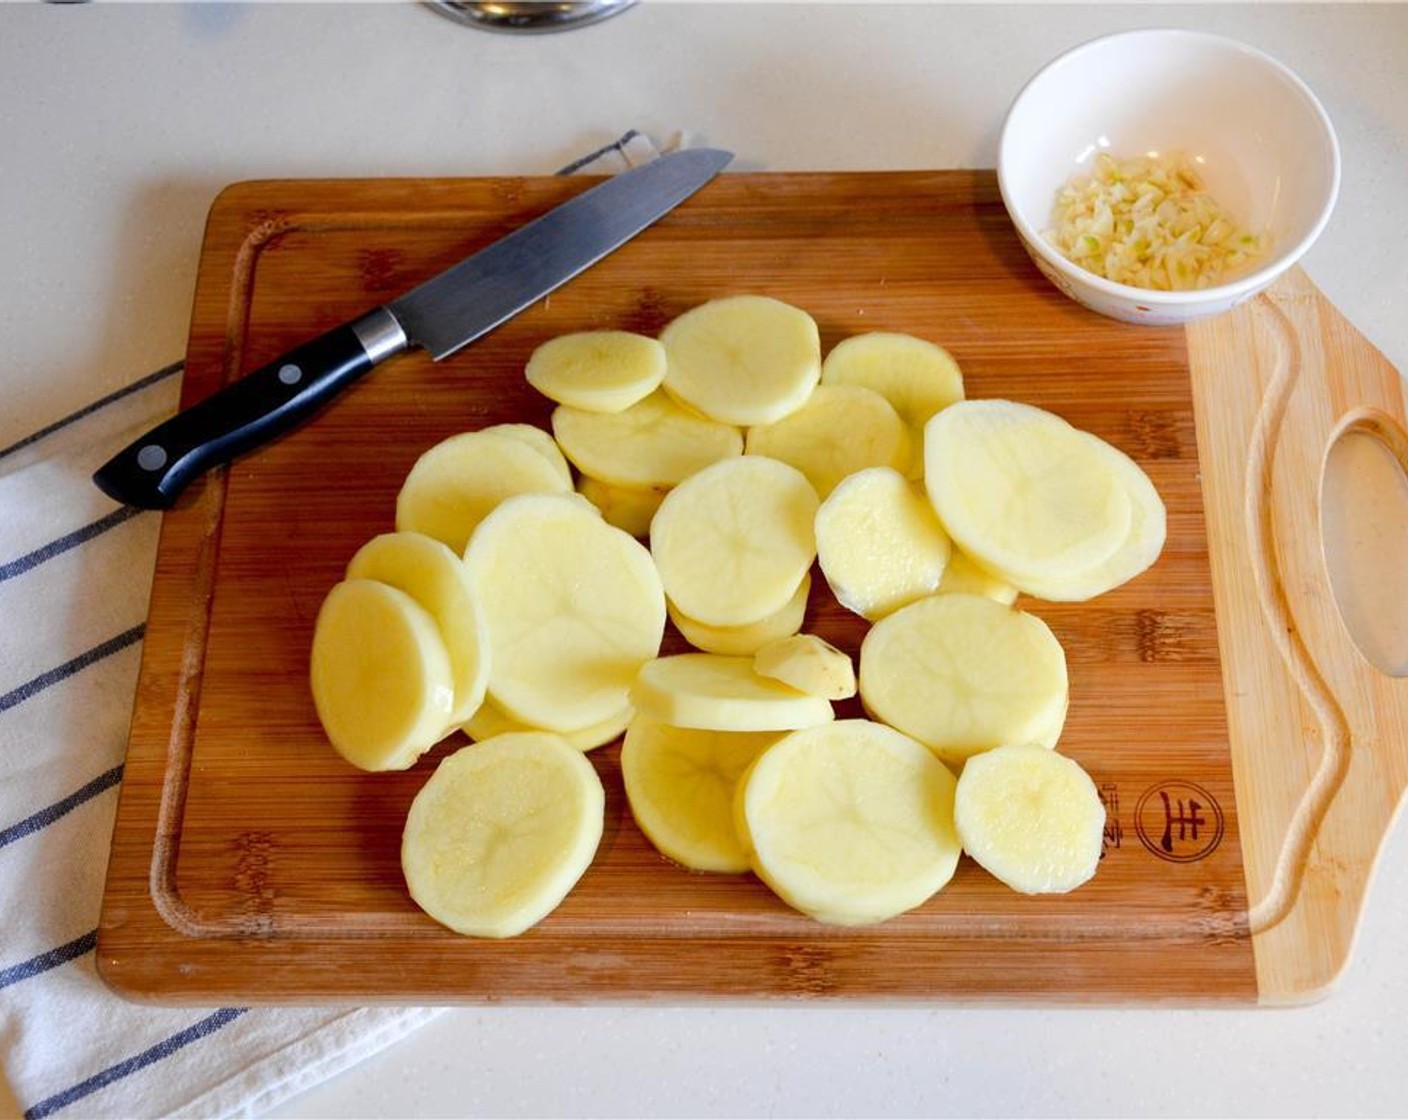 step 3 Peel and slice the Potatoes (2.2 lb) 1/2 inch thickness. Try to slice them to relatively the same size, so they can cook uniformely in the oven.